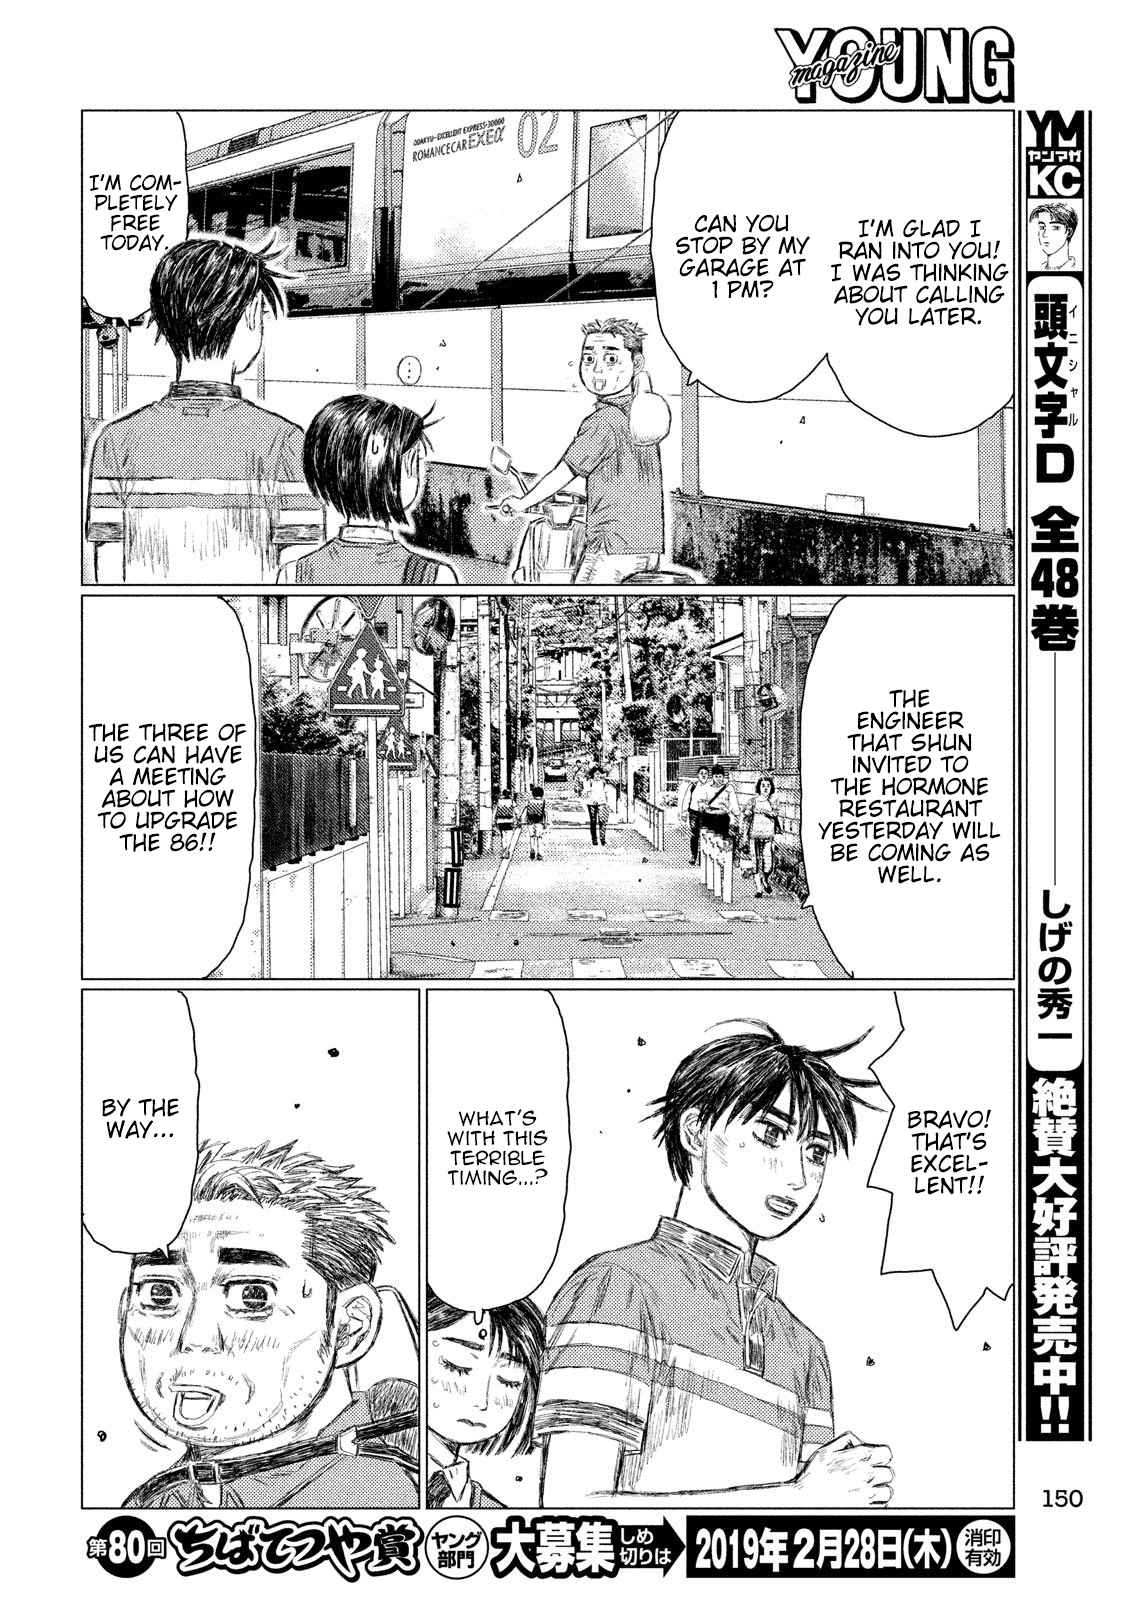 MF Ghost Vol. 4 Ch. 45 Peaceful Everyday Life